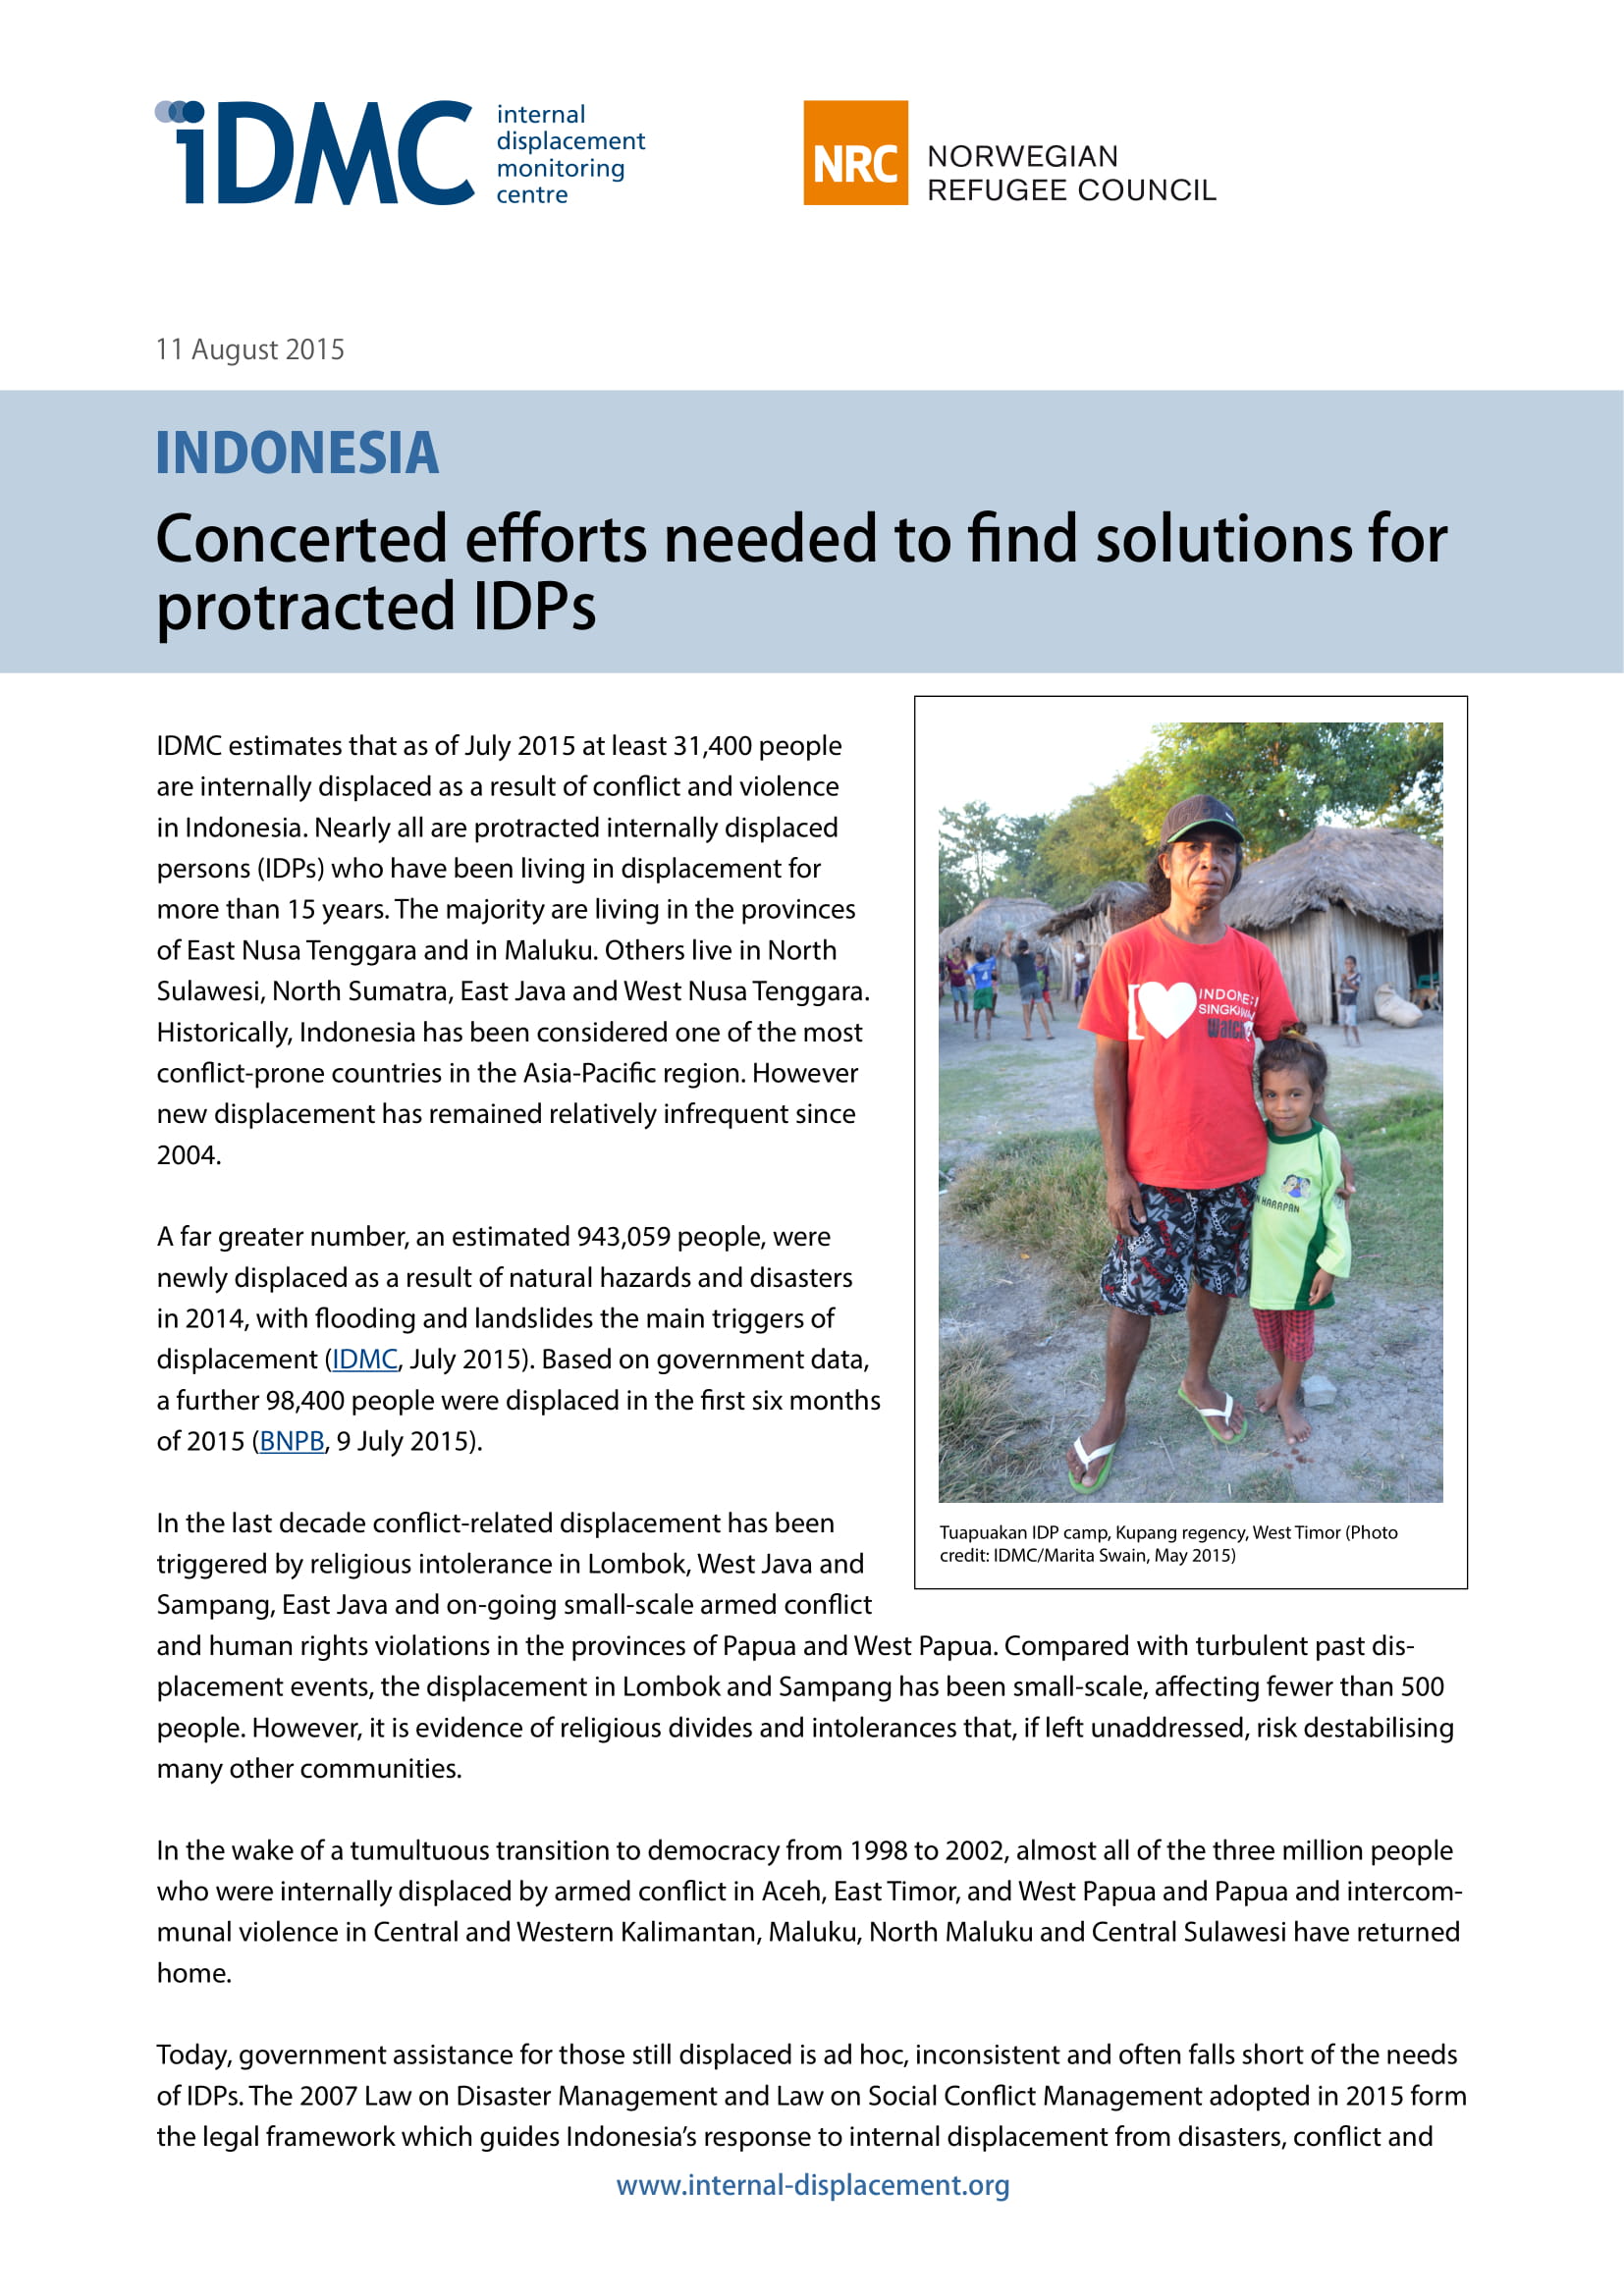 Indonesia: Concerted efforts needed to find solutions for protracted IDPs